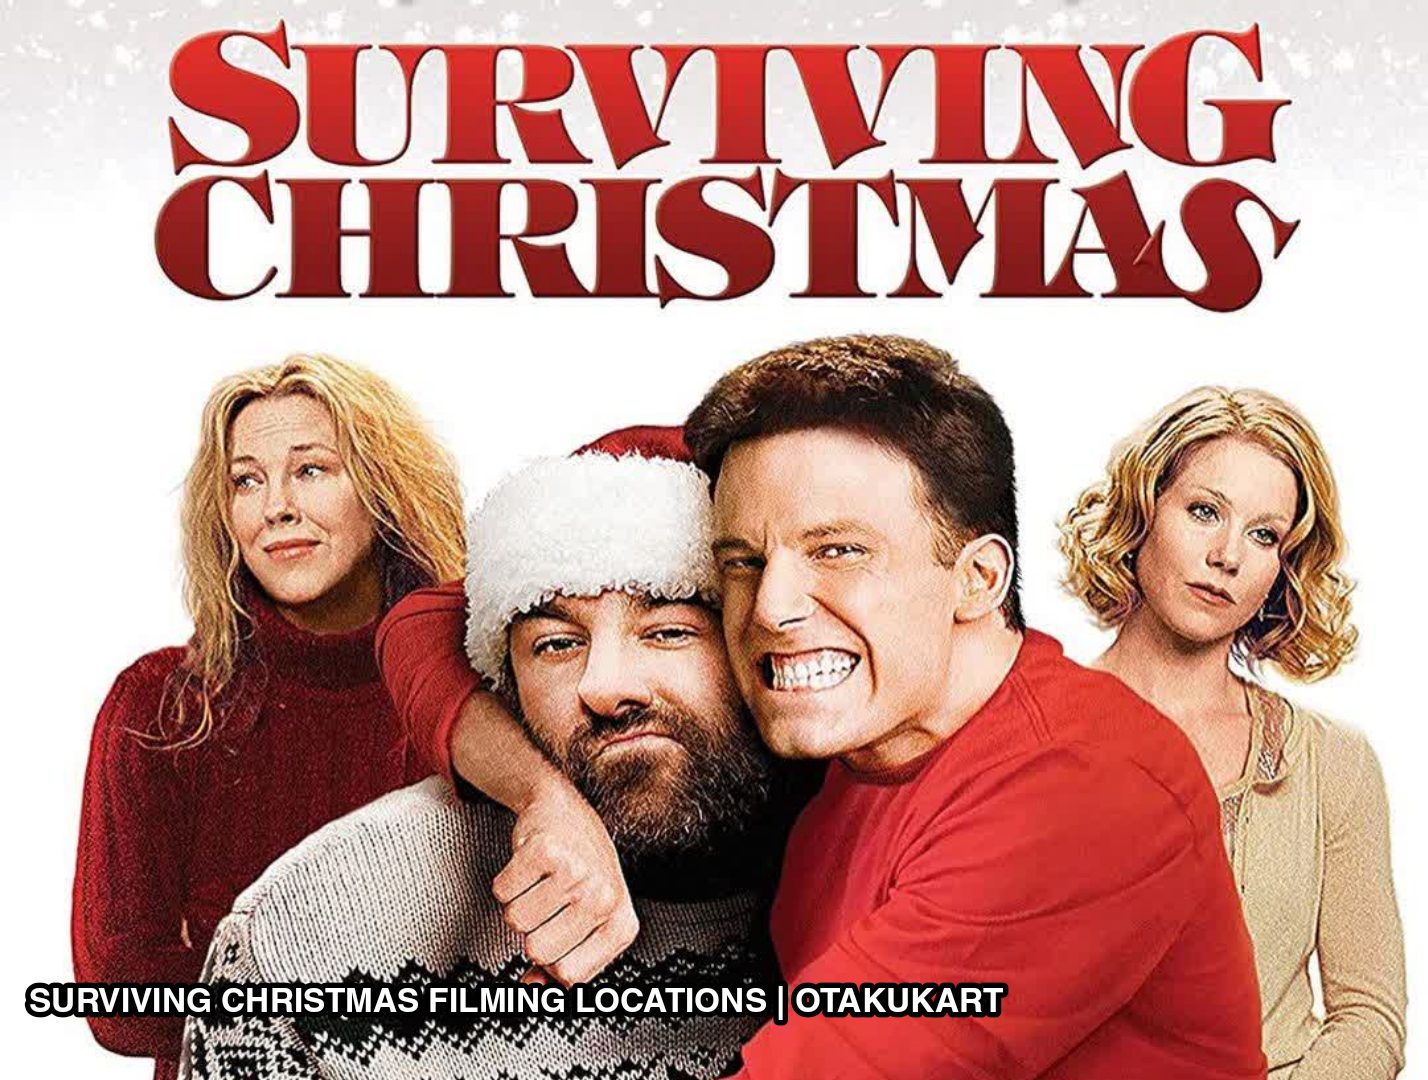 Surviving Christmas Filming Locations